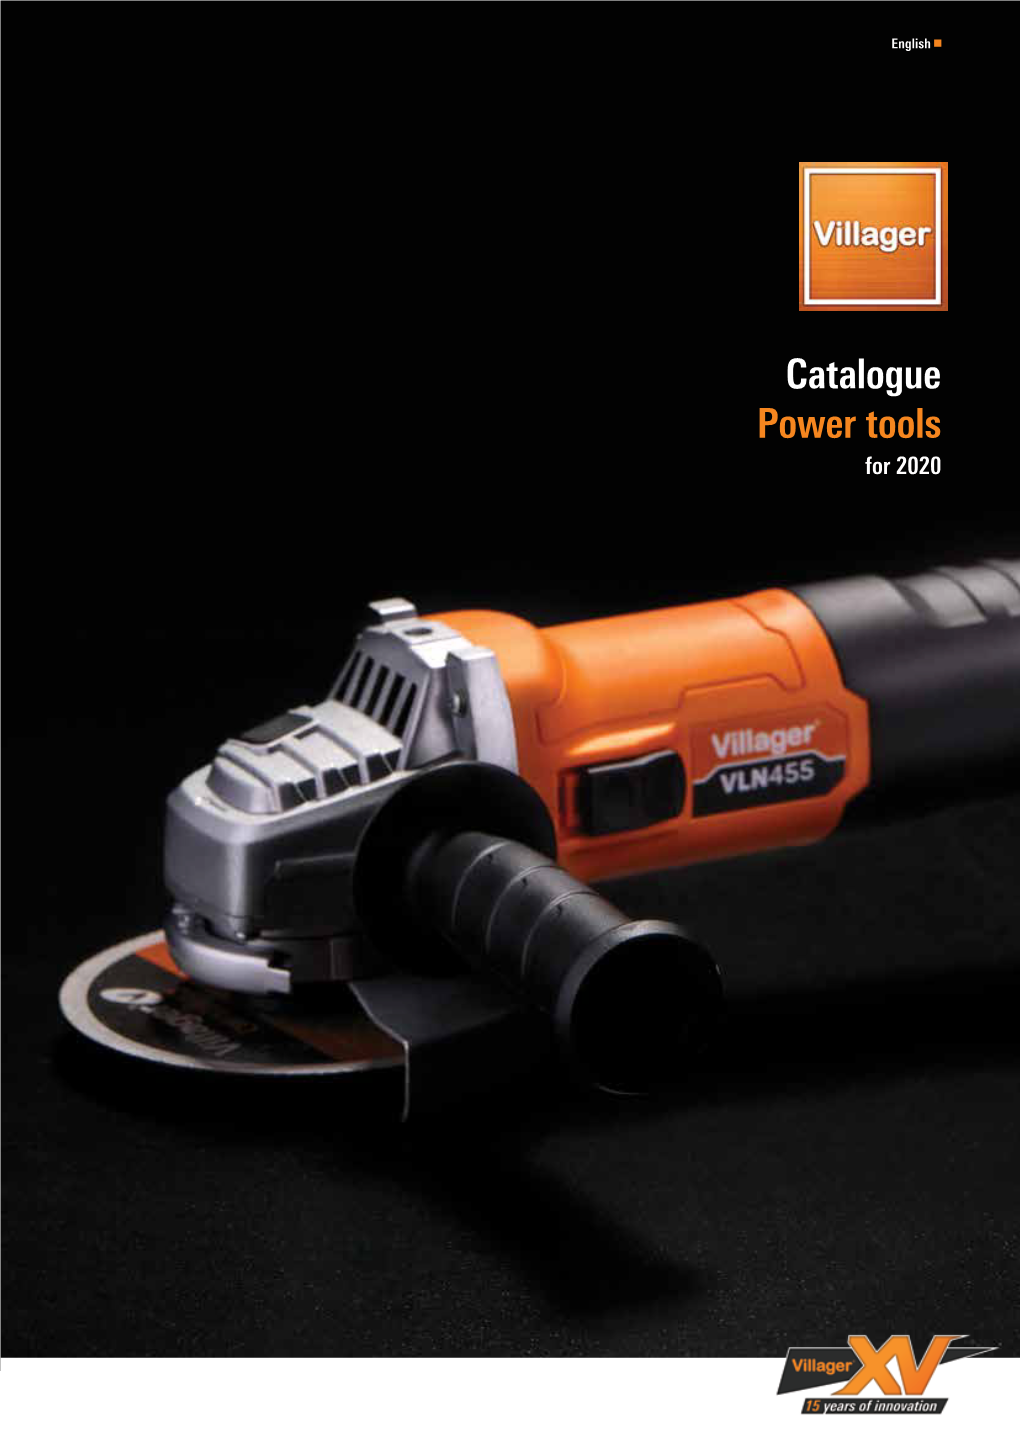 Catalogue Power Tools for 2020 Dear Friends Colleagues and Partners